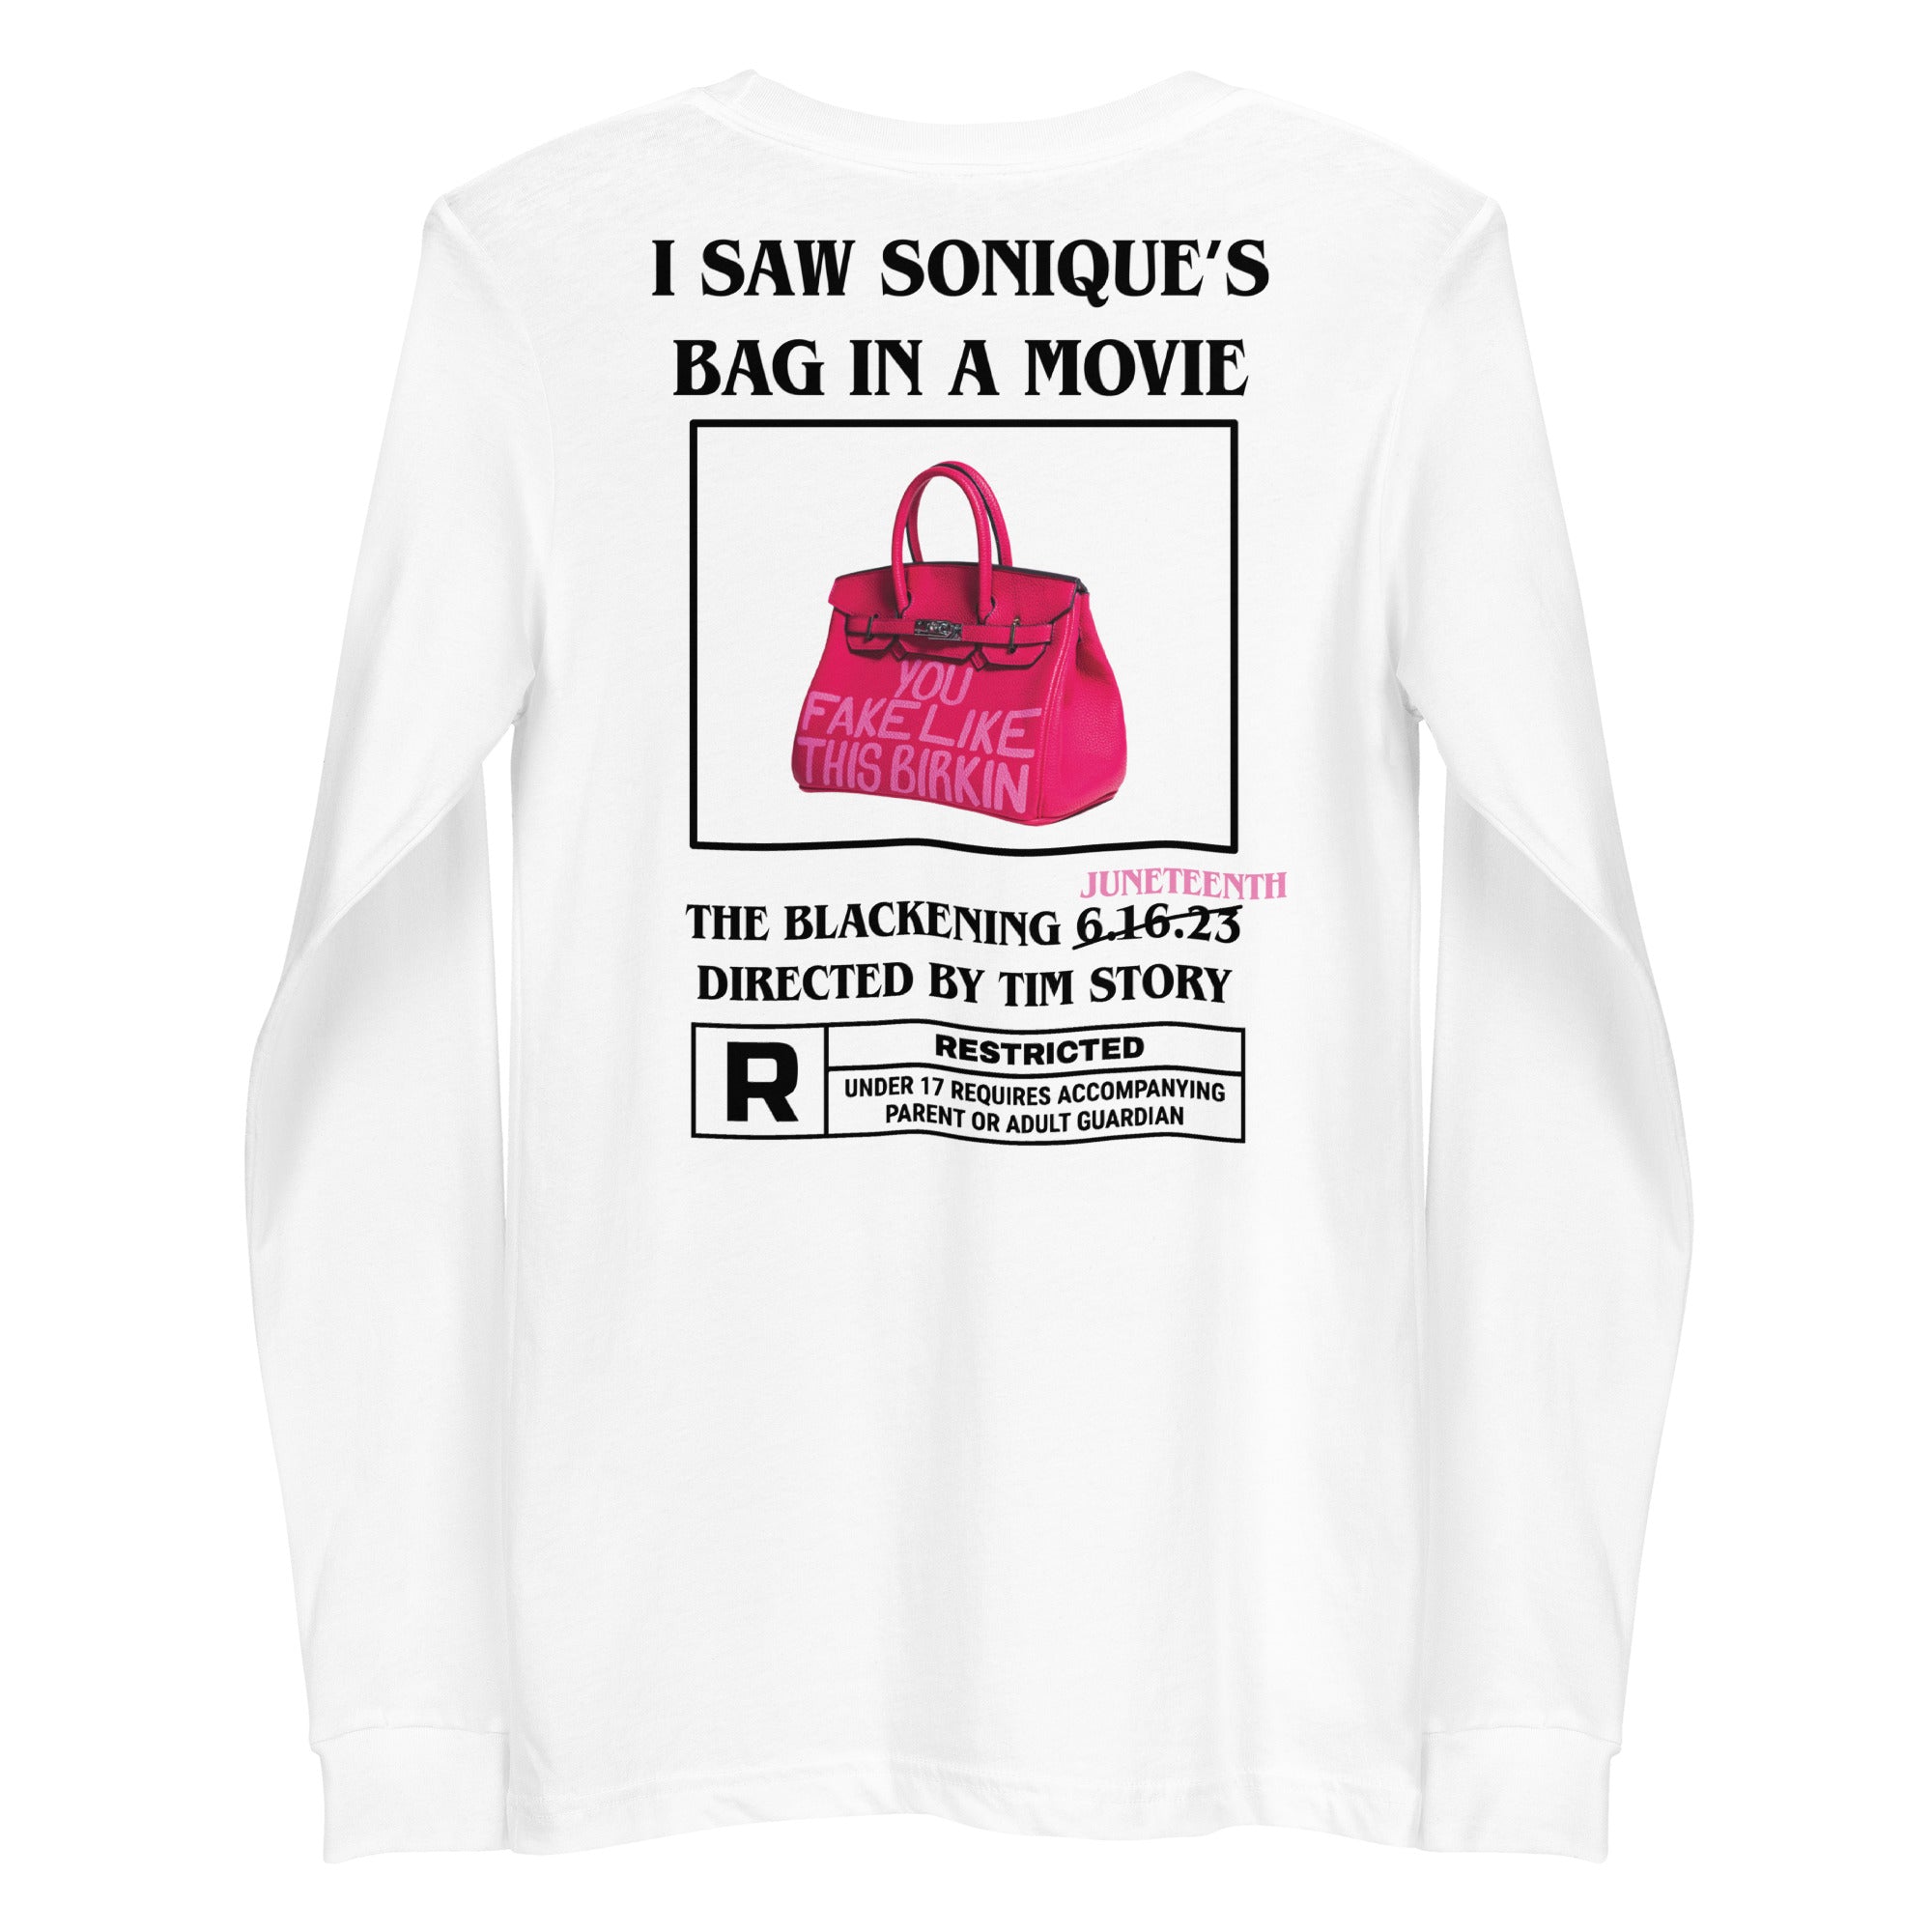 I Saw Sonique's Bag Long Sleeve Tee - White